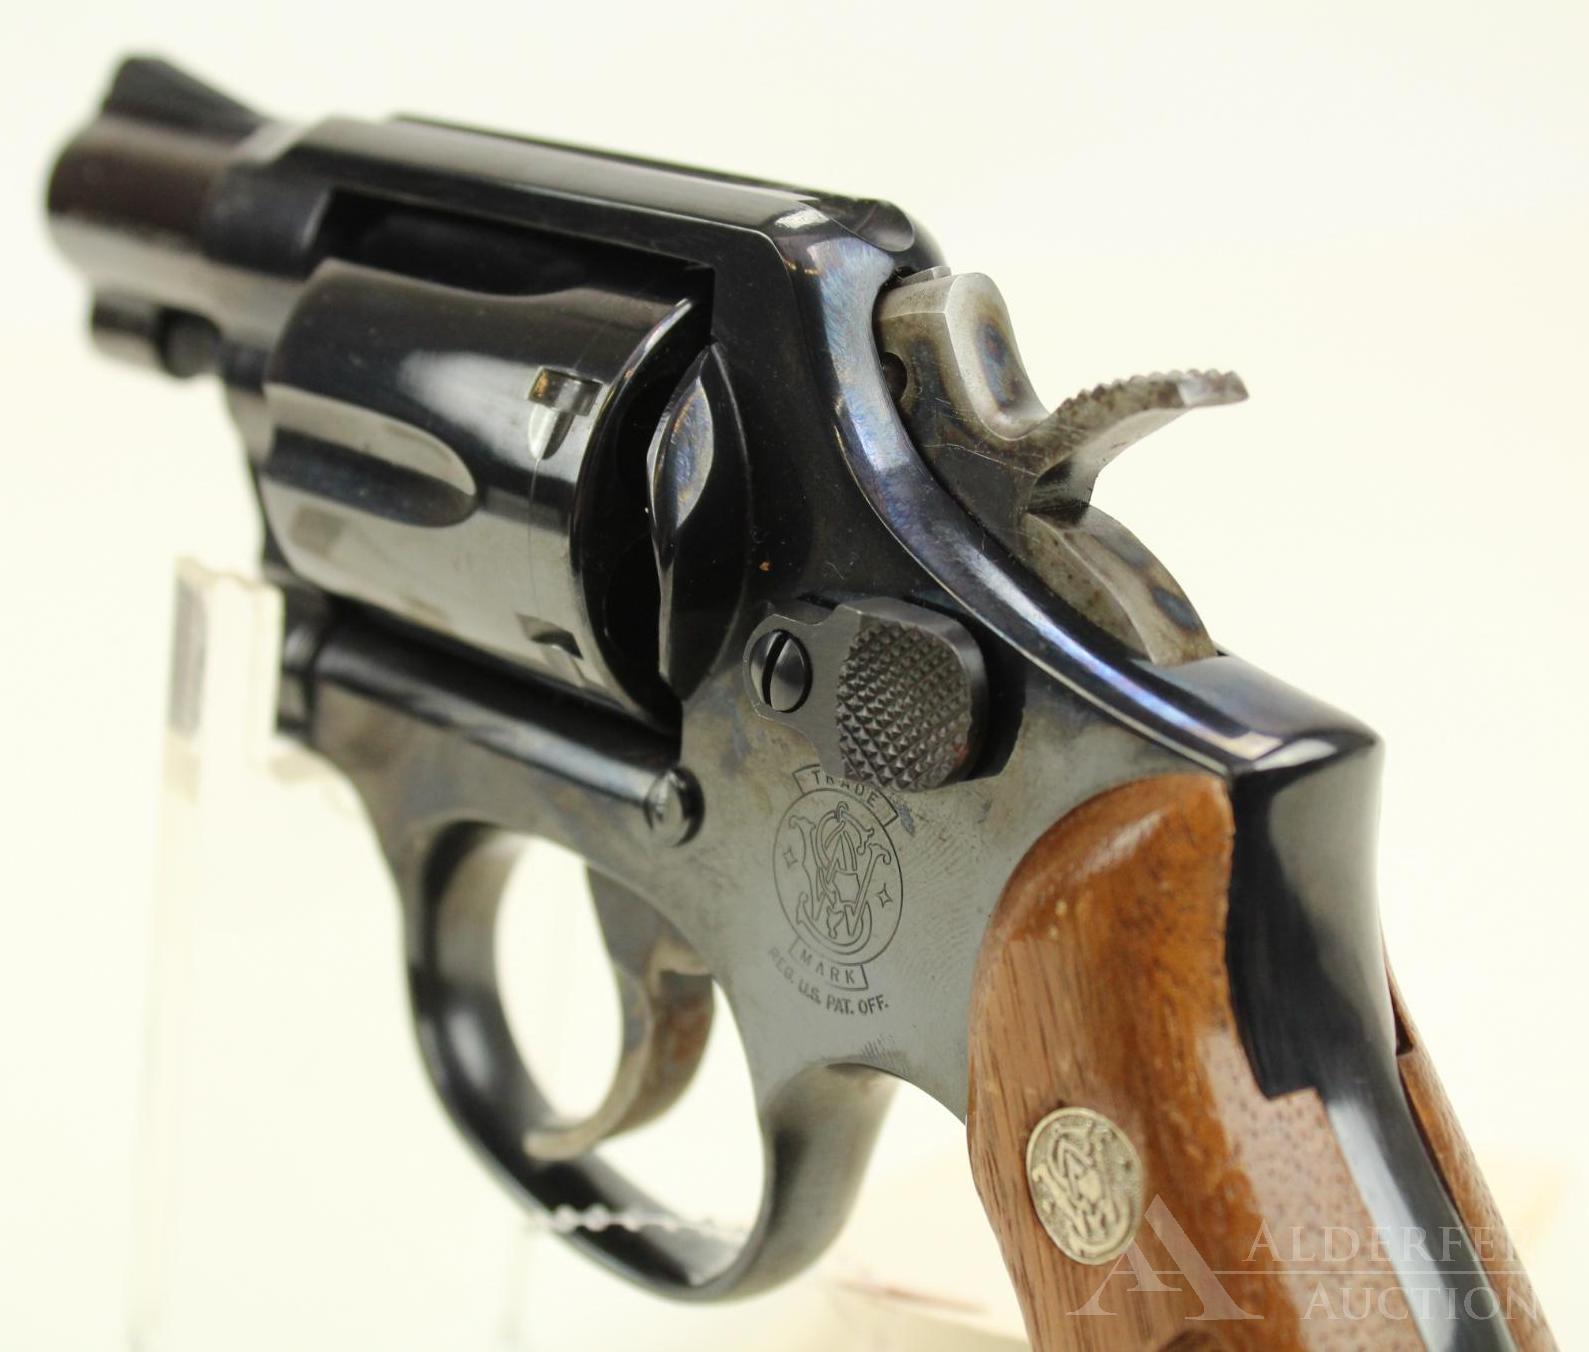 Smith & Wesson 10-9 double action revolver.